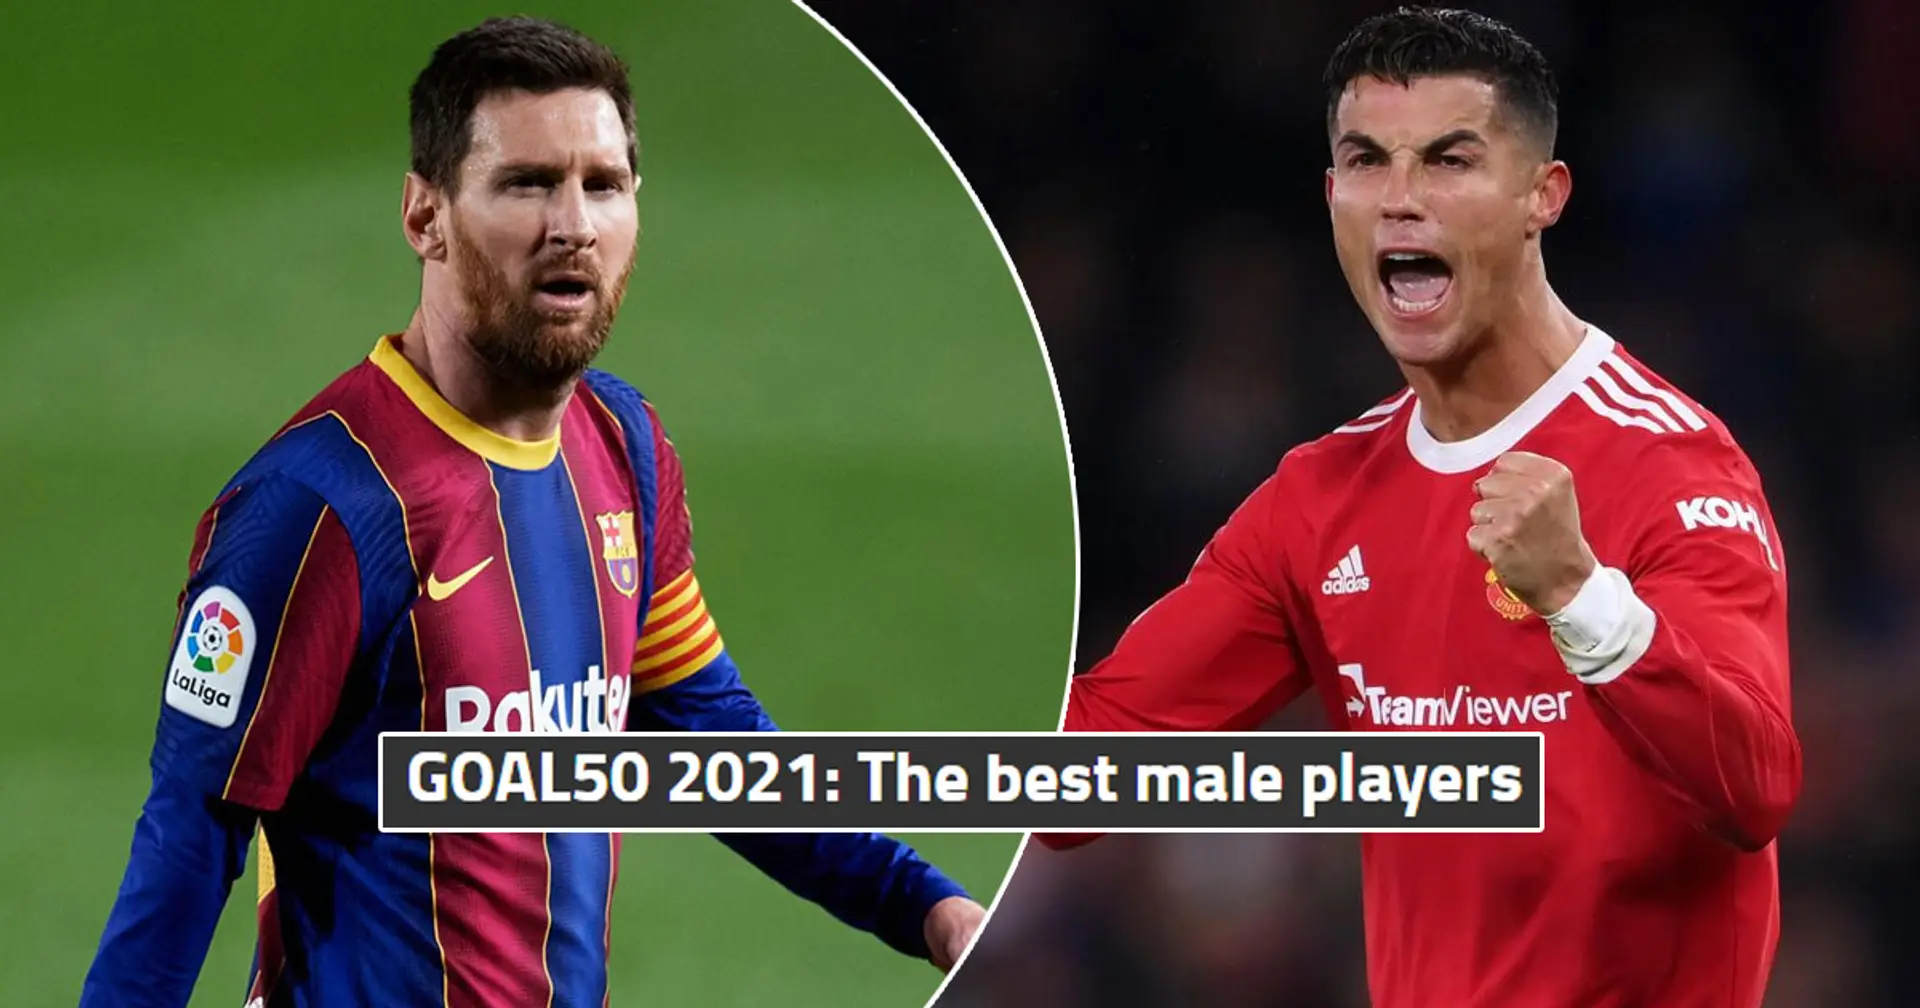 Ronaldo voted second best player in 2021 by fans, Messi and 3 Barca players on the list